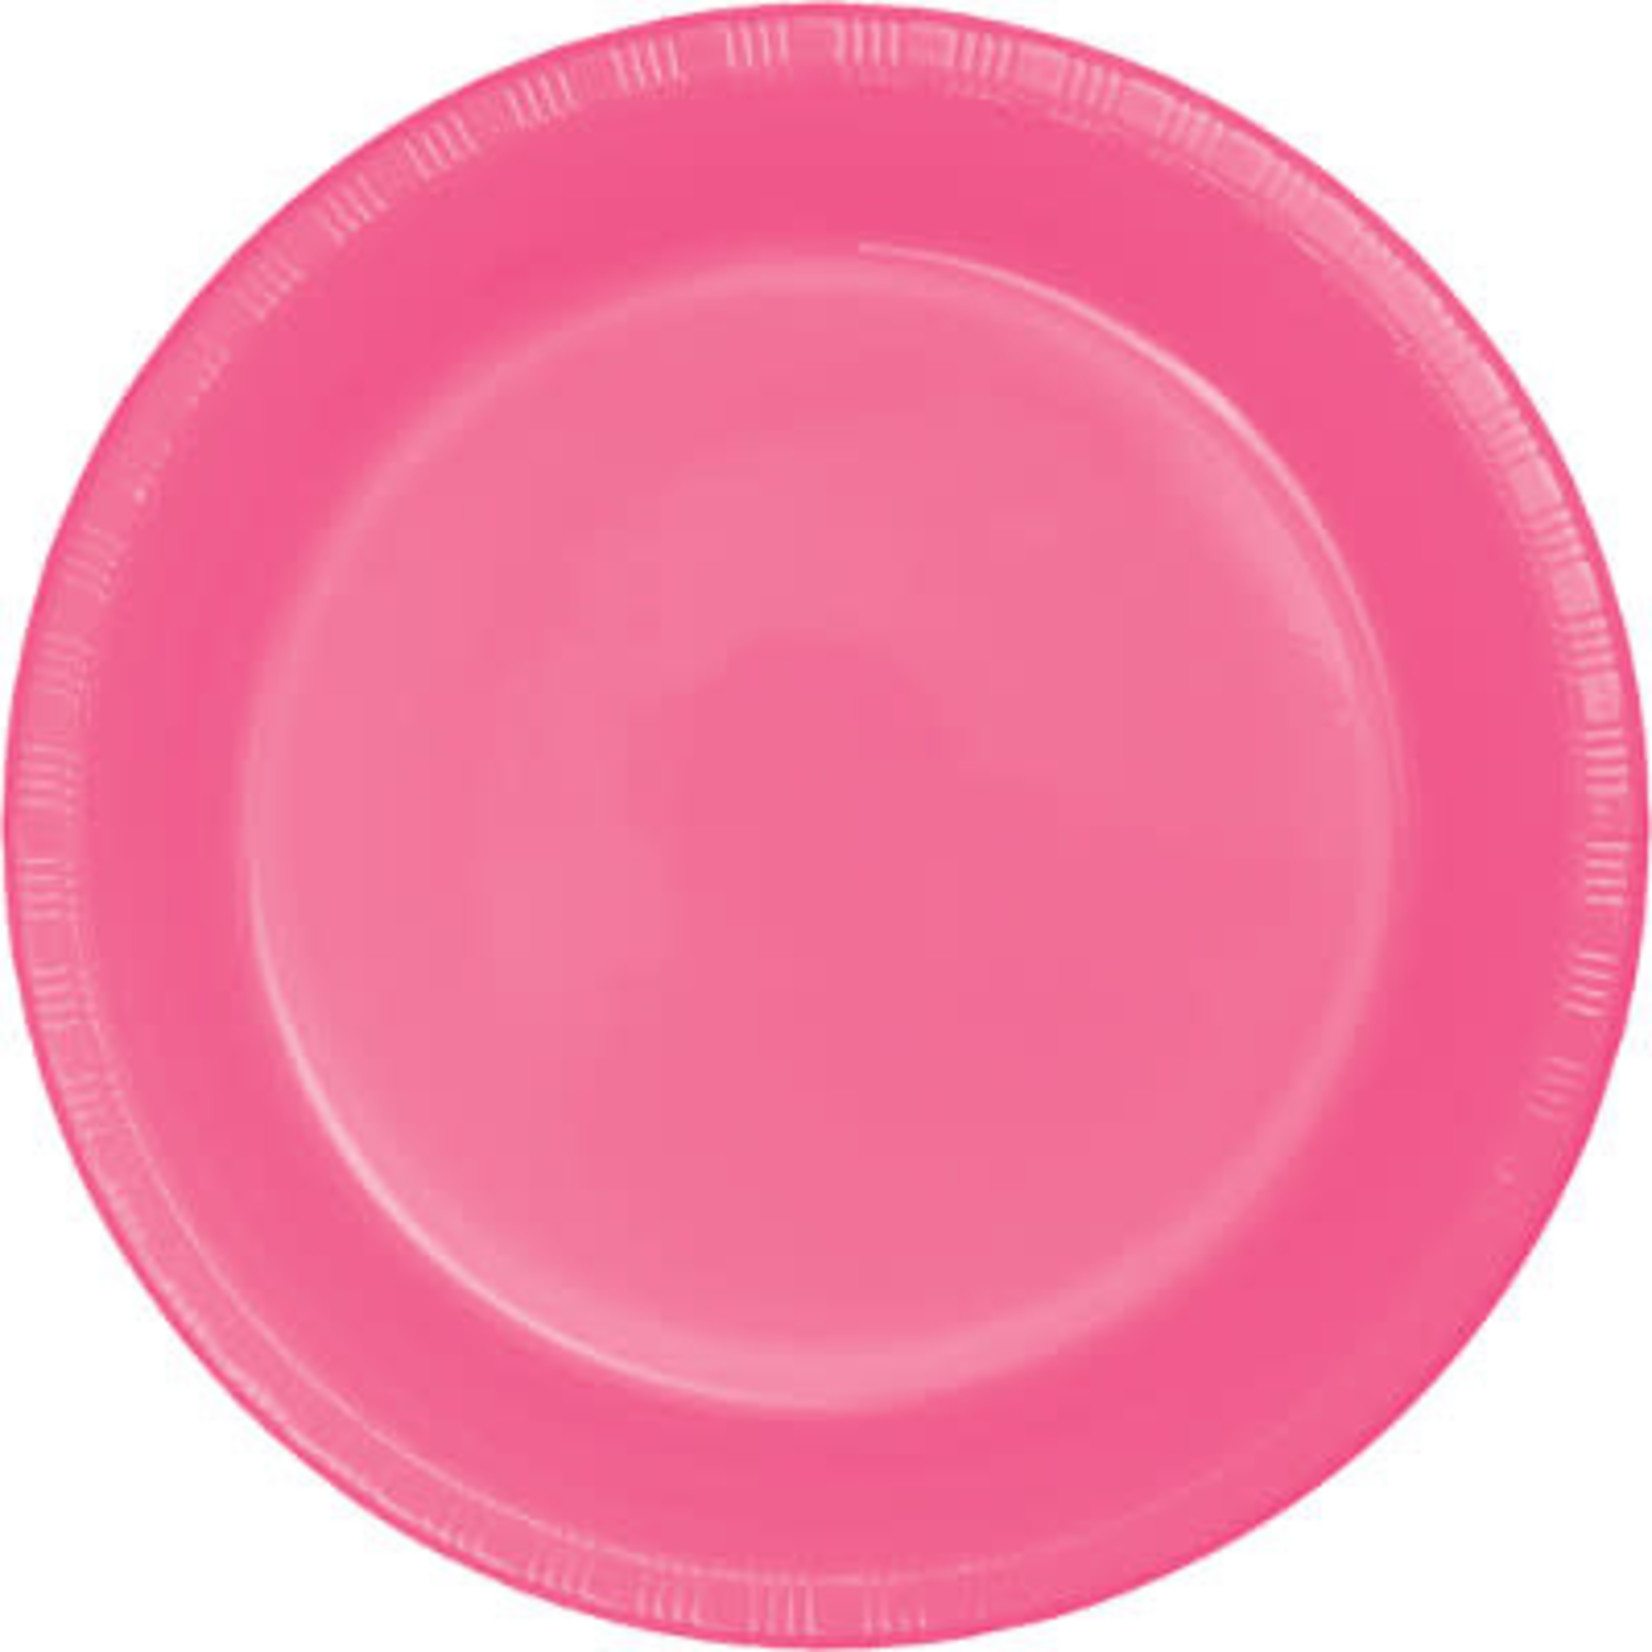 Touch of Color 10" Candy Pink Plastic Banquet Plates - 20ct.